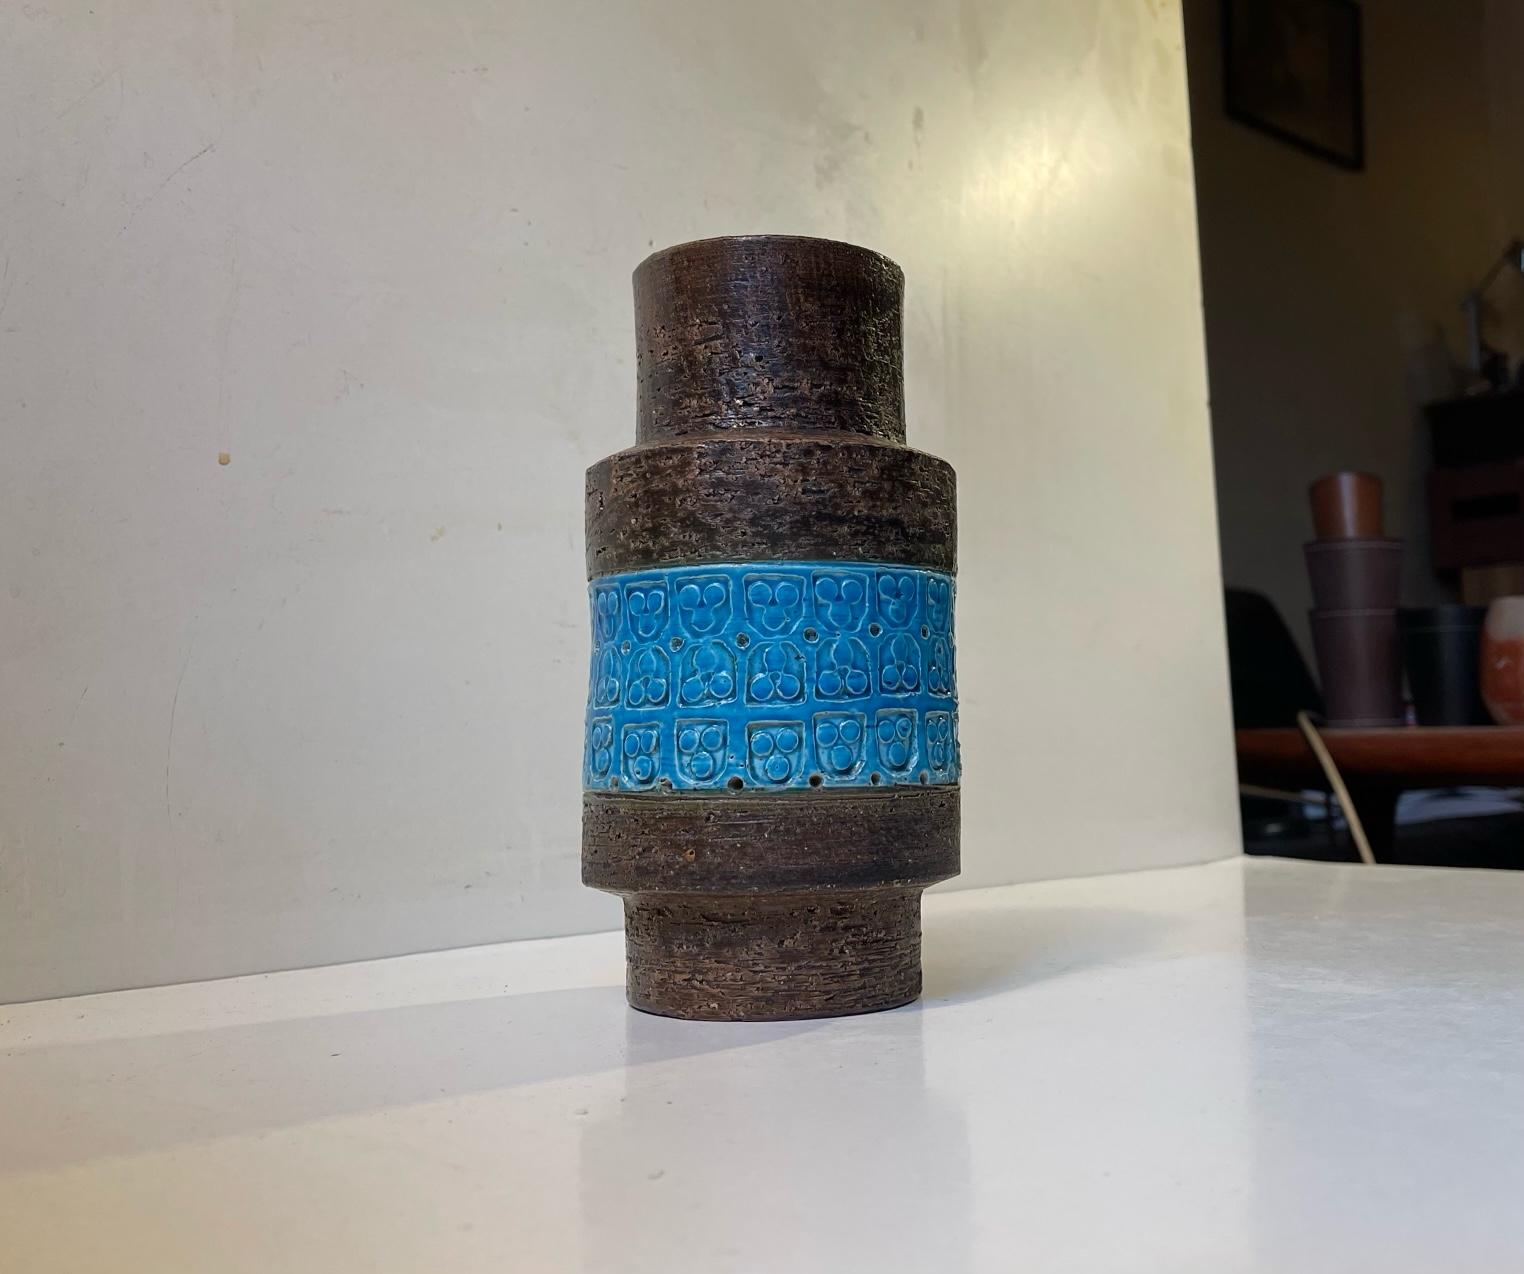 Aldo Londi designed this lacquered chamotte stoneware vase with Rimini Blue Trifoglio center patterns during the 1960s. It was manufactured in Italy by Bitossi. Measurements: H: 20 cm, D: 7.7 cm (top).